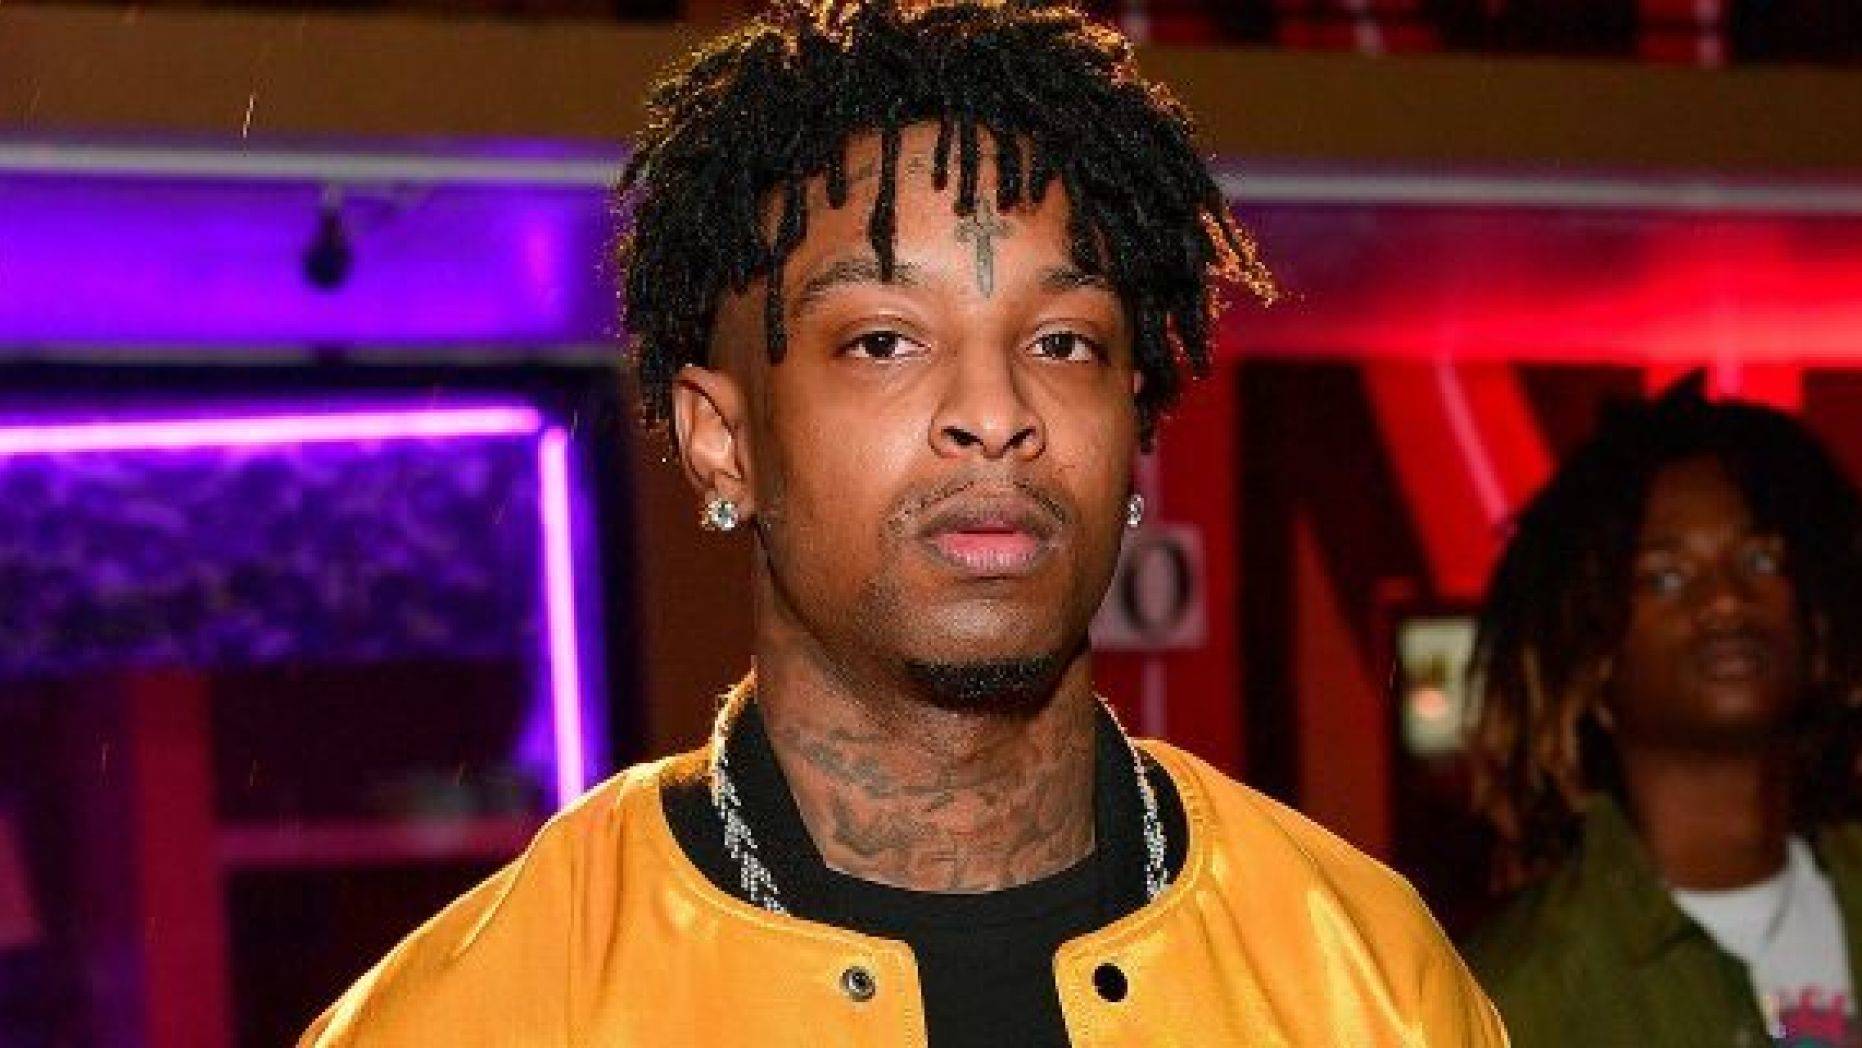 21 Savage News: There's A Petition To Stop His Deportation